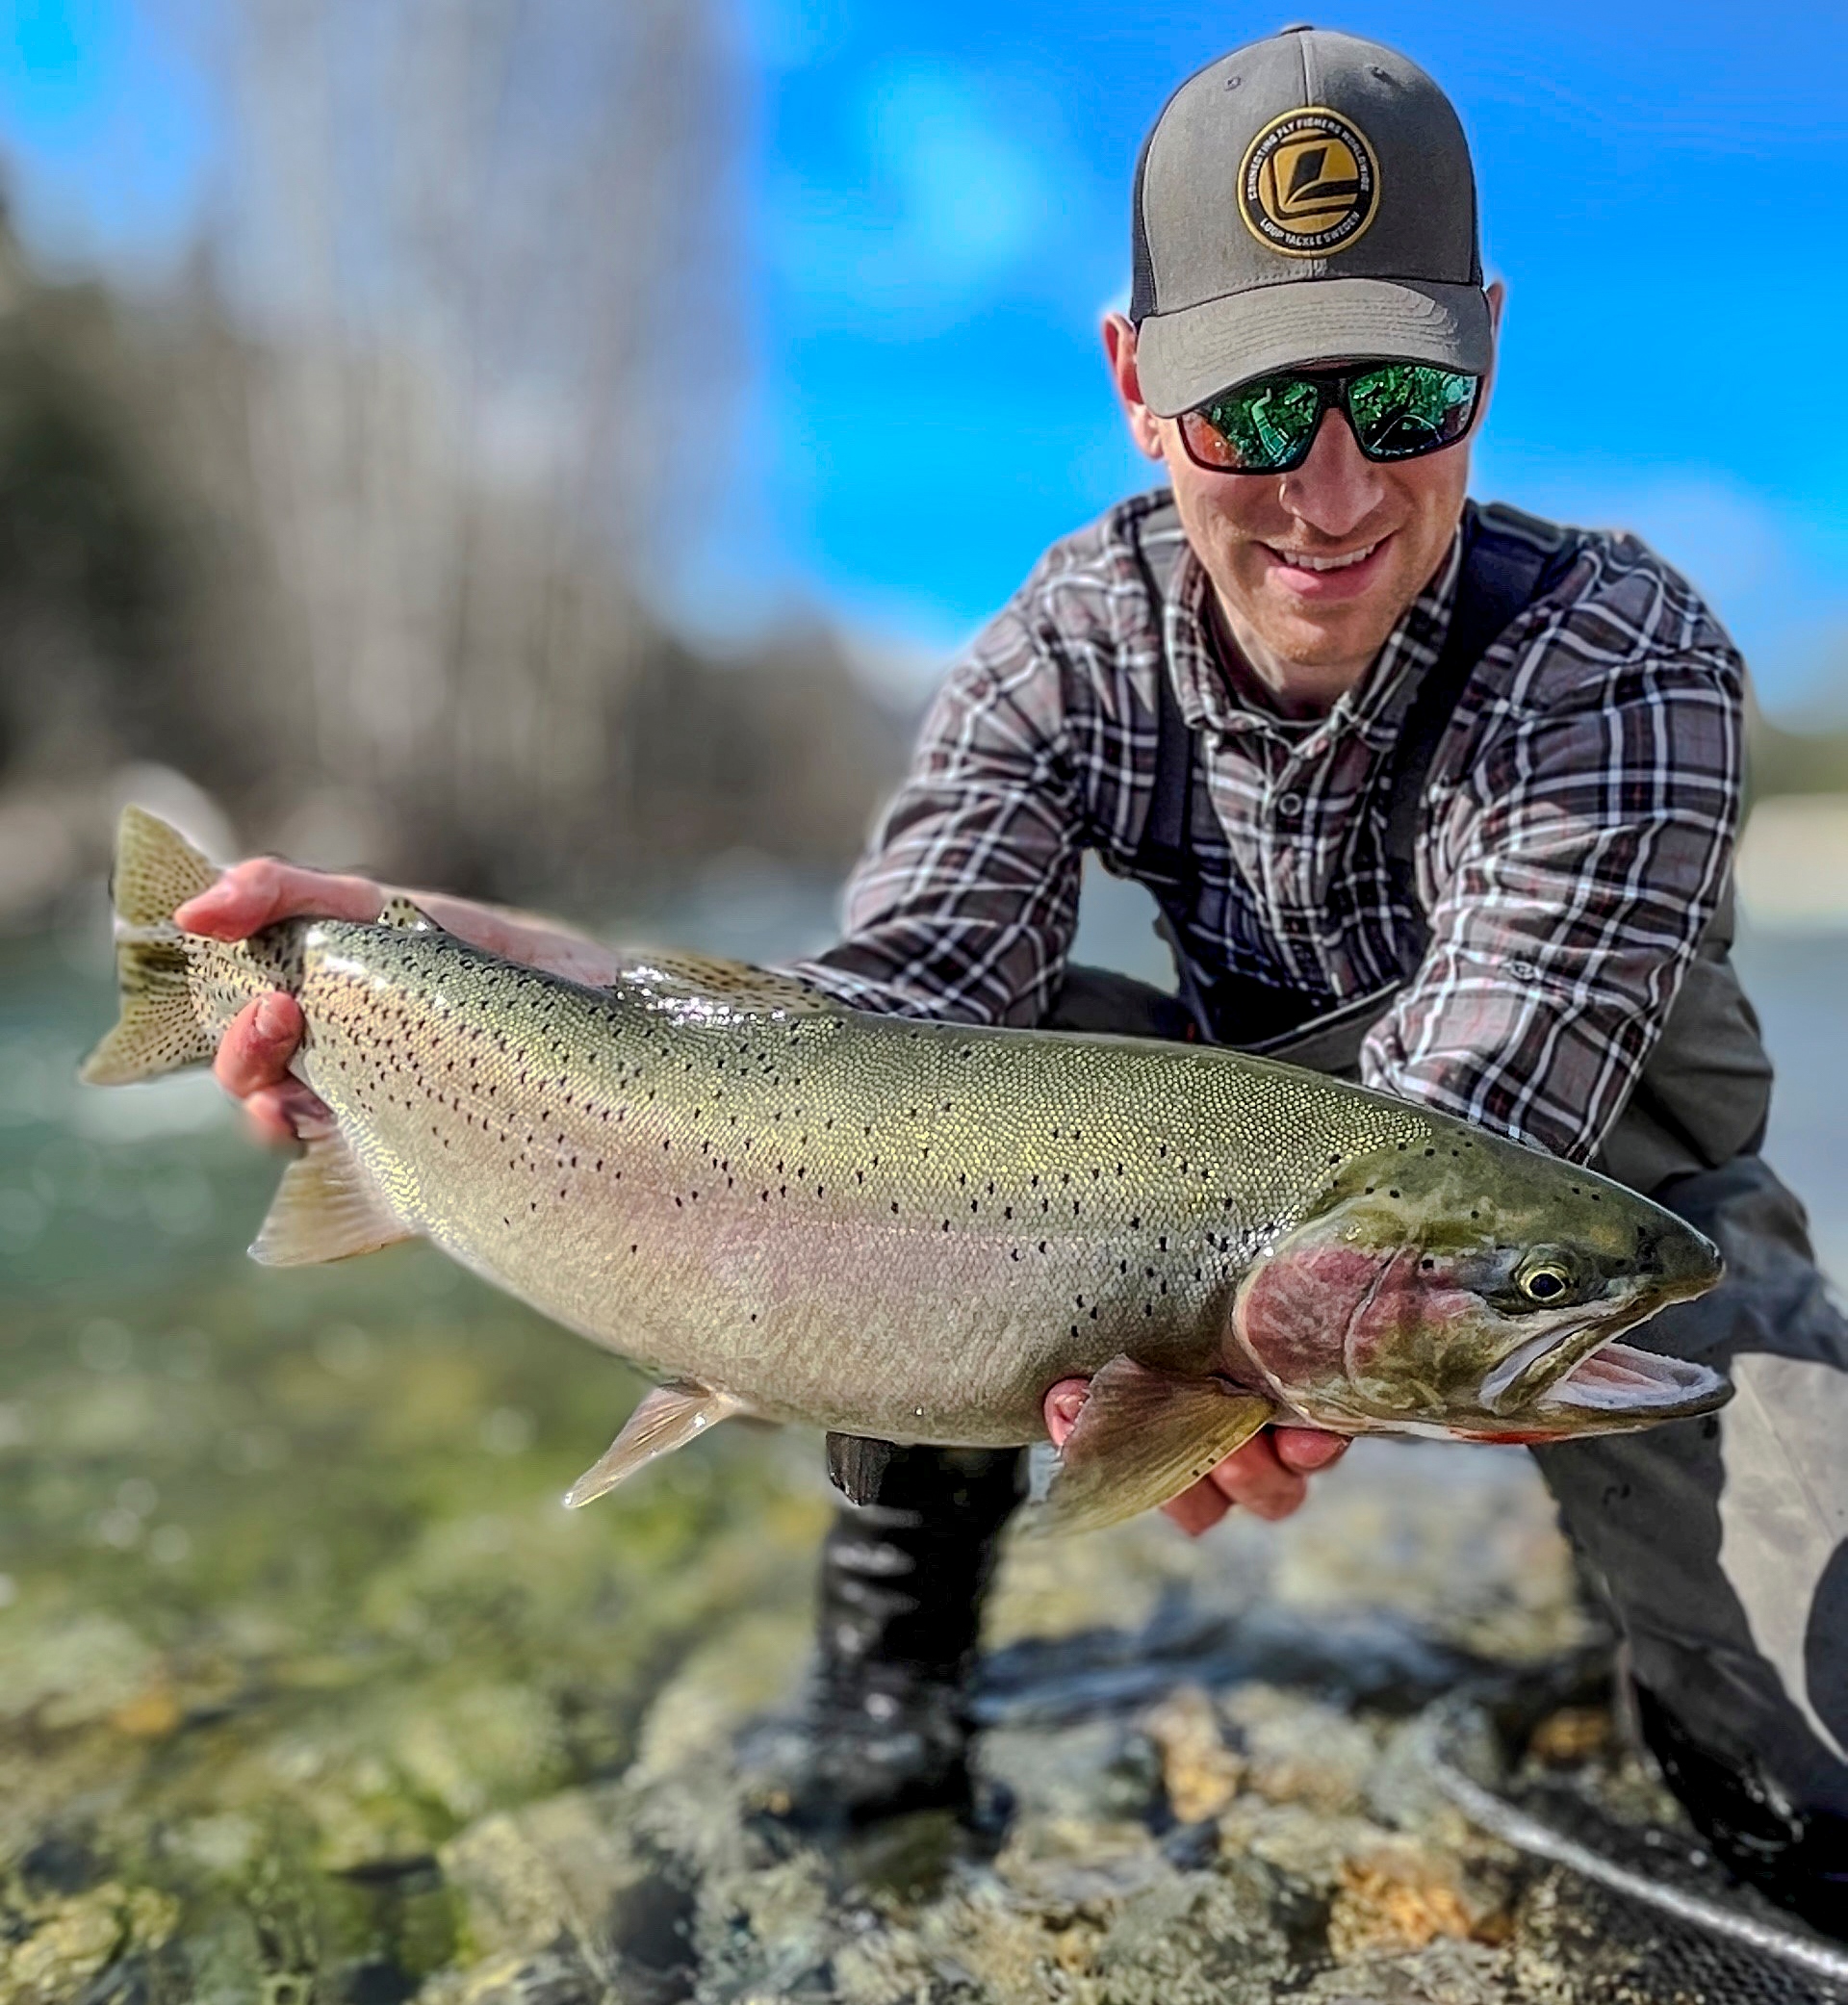 Idaho sate fishing record westslope cutthroat trout